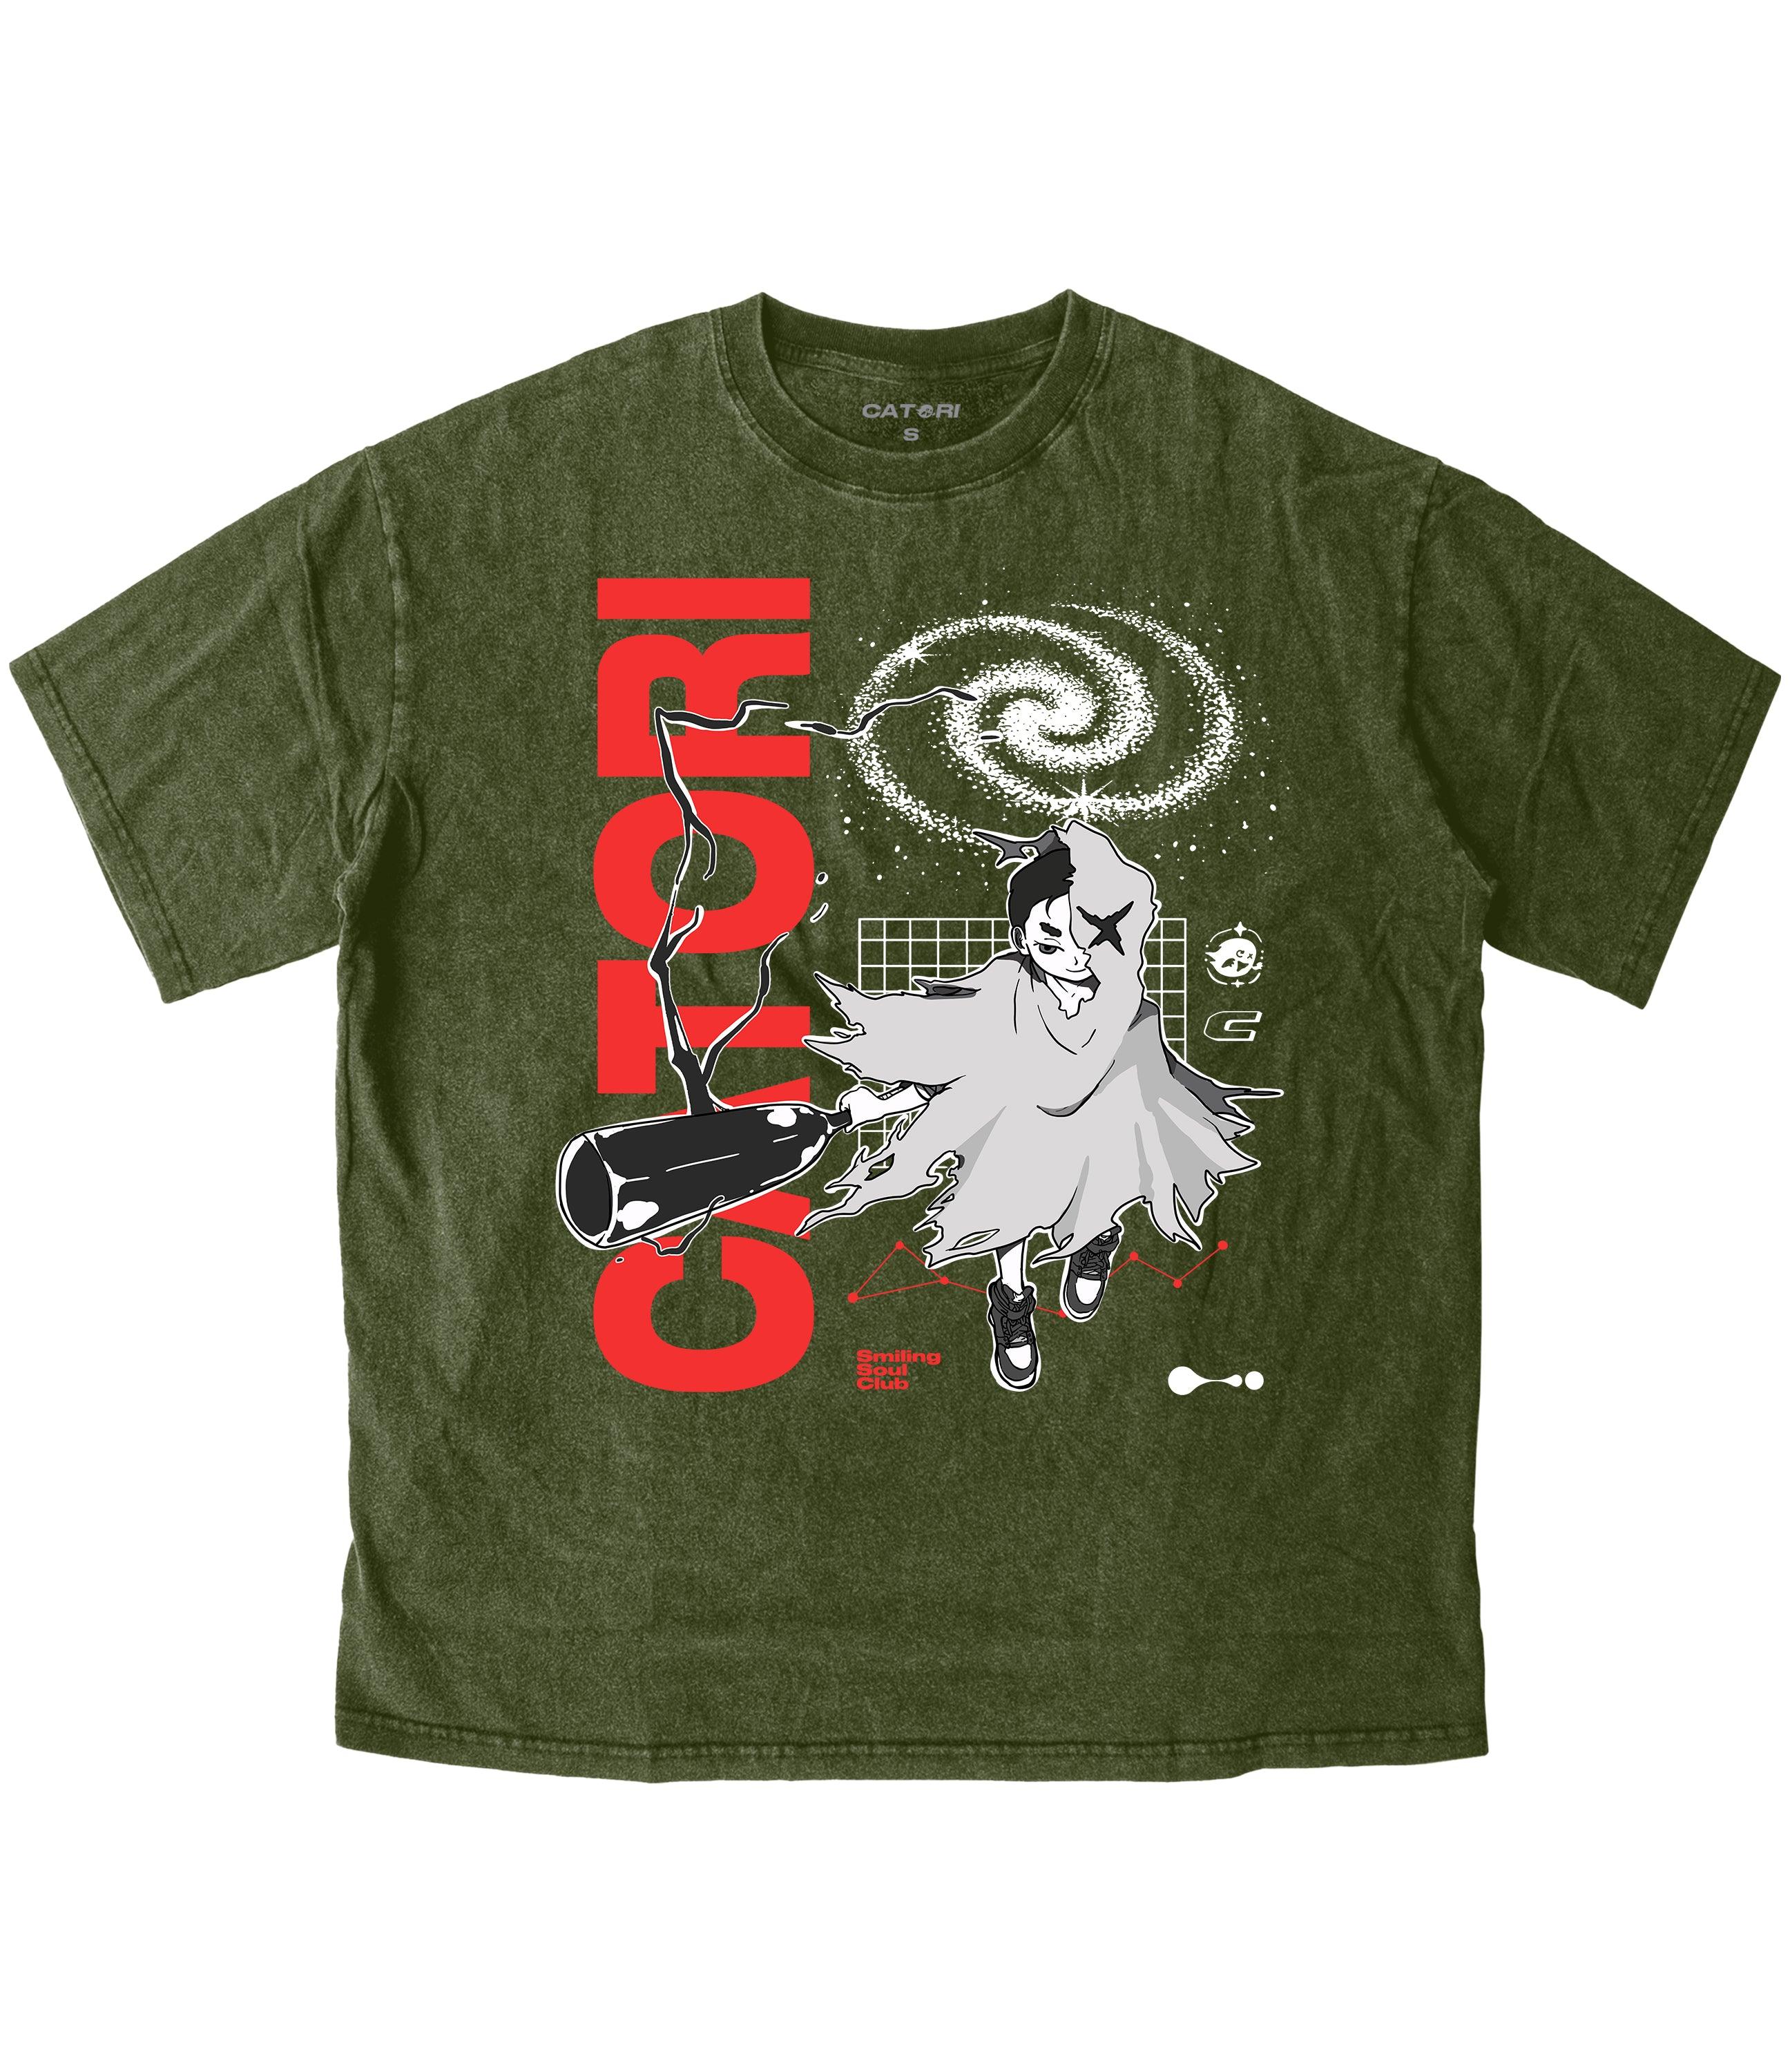 Space Ghost Vintage T-Shirt at Catori Clothing | Graphic & Anime Tees, Hoodies & Sweatshirts 